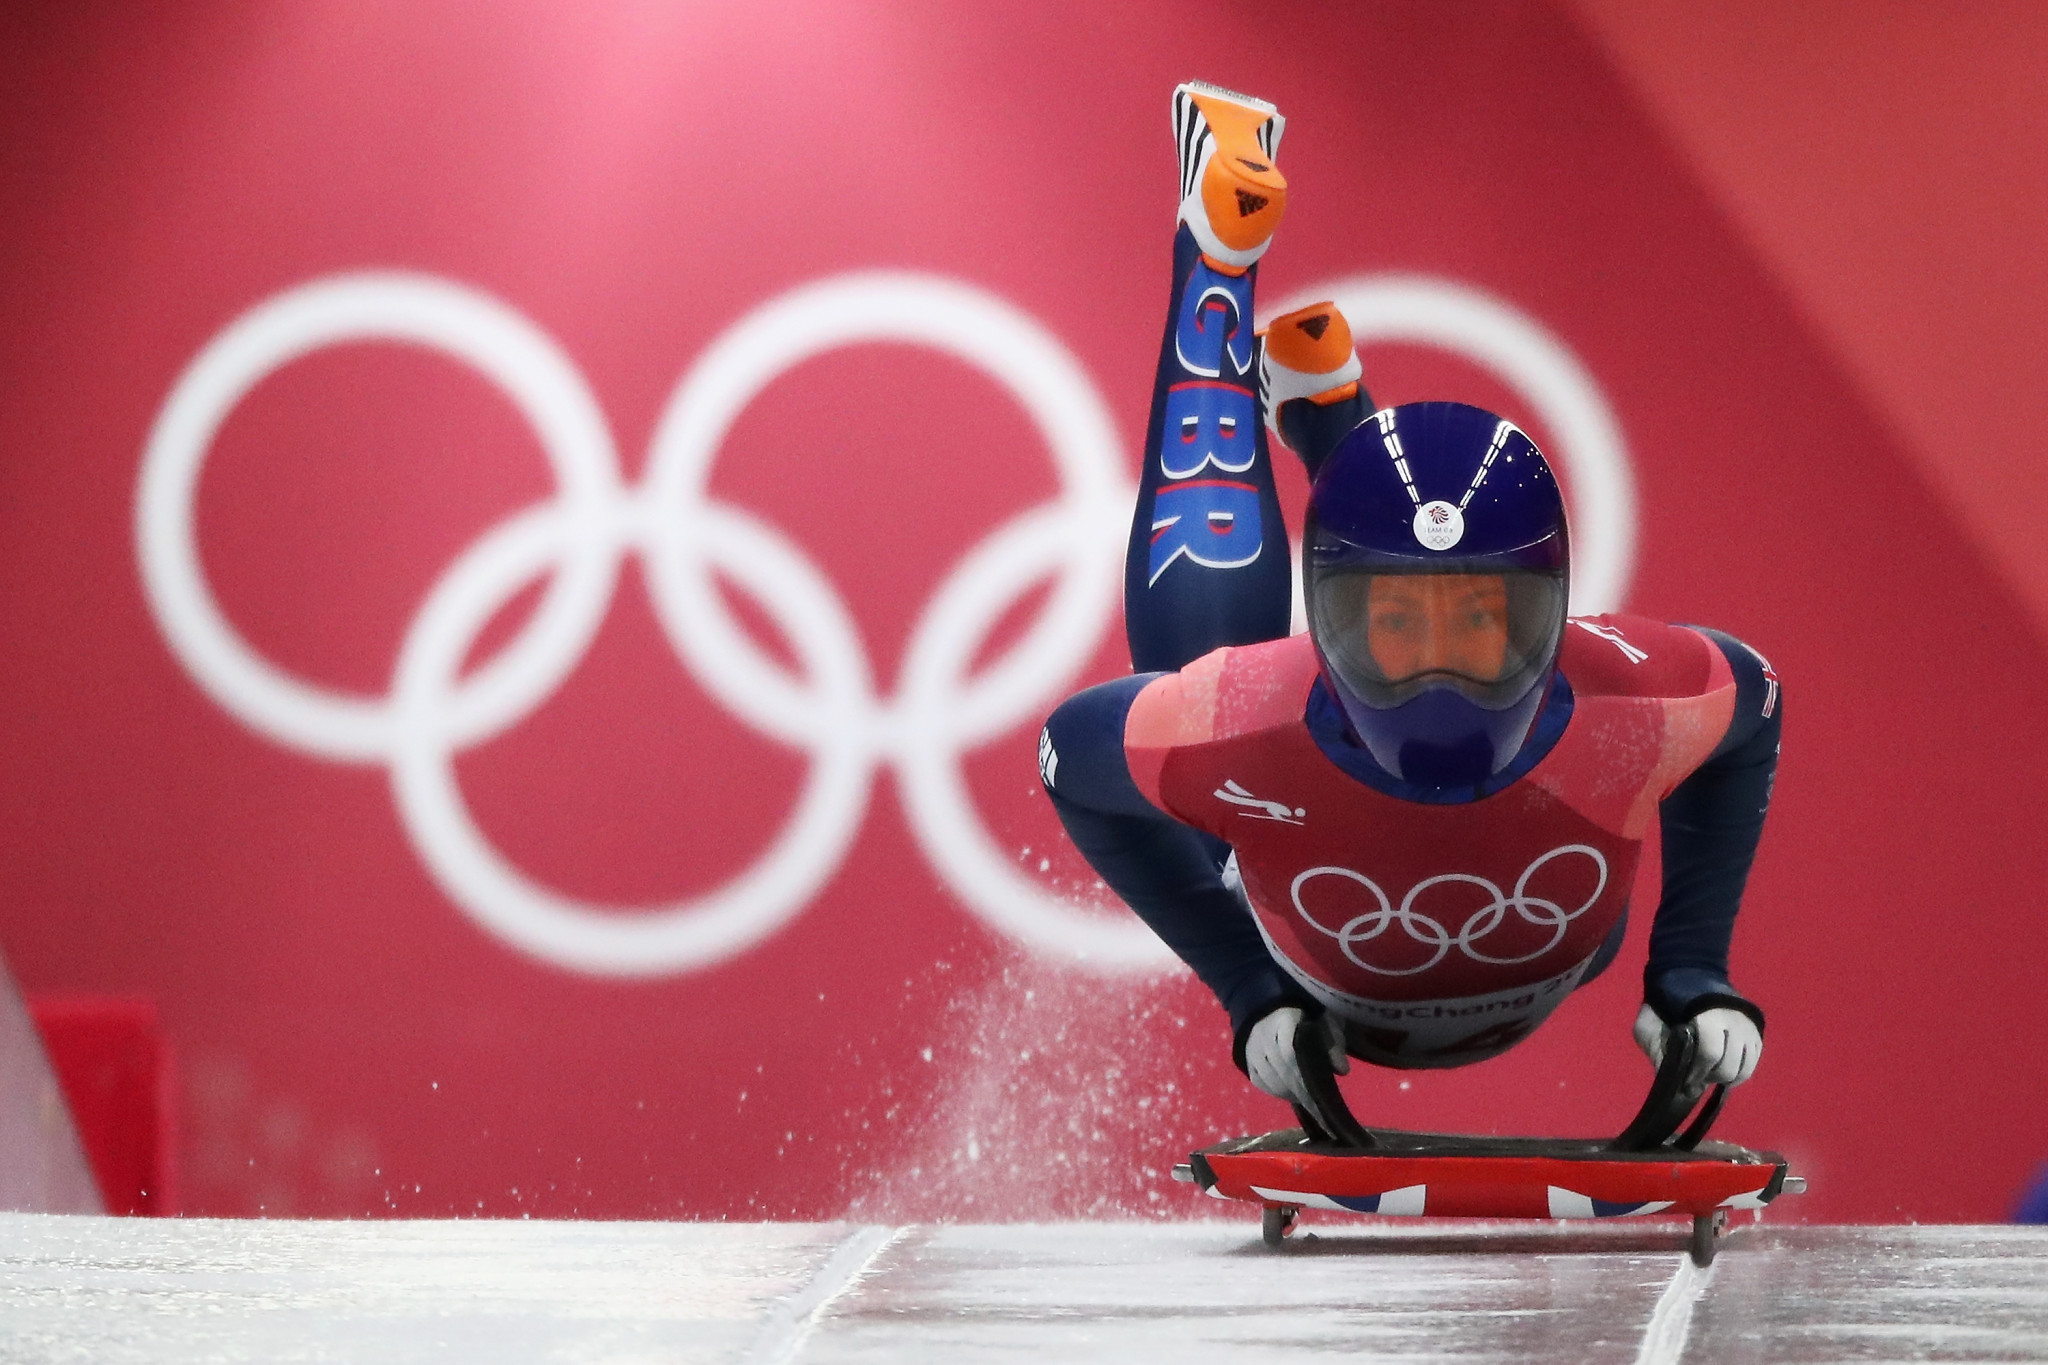 Lizzy Yarnold participated in National School Sport Week ©Getty Images